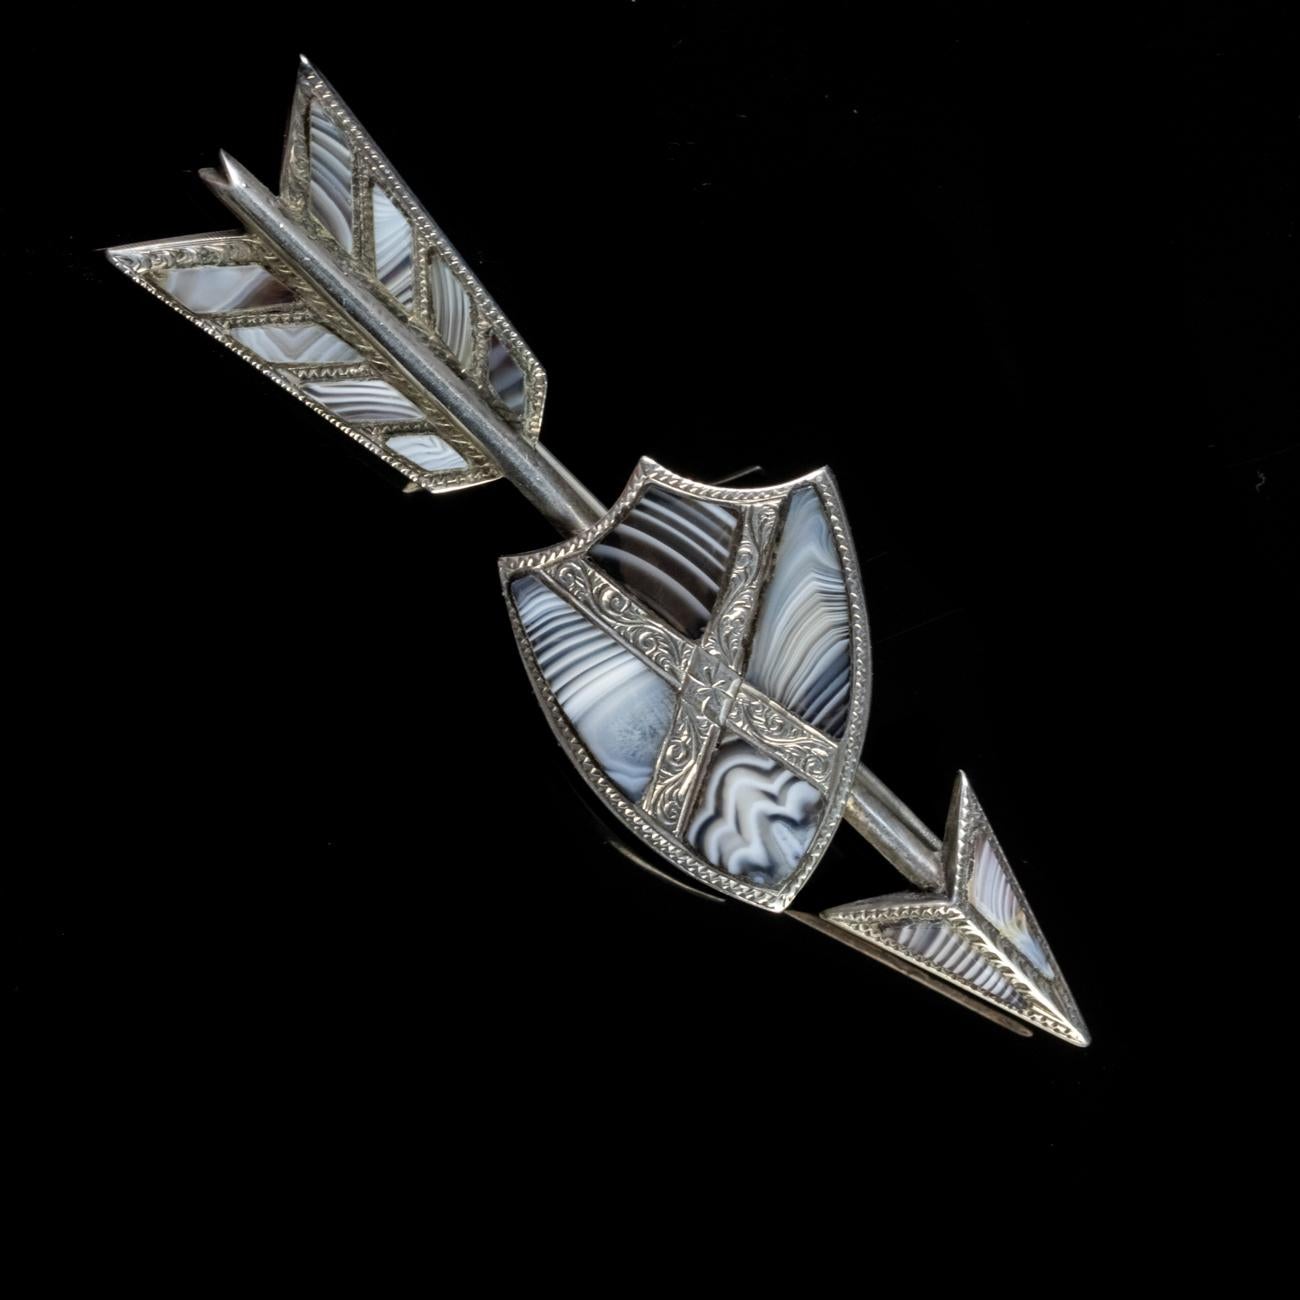 This fantastic Antique Victorian Scottish brooch has been modelled in Silver to form the shape of a shield with an arrow behind it. The silver work features intricate engravings and the brooch has been set with an array of beautiful Montrose Agate